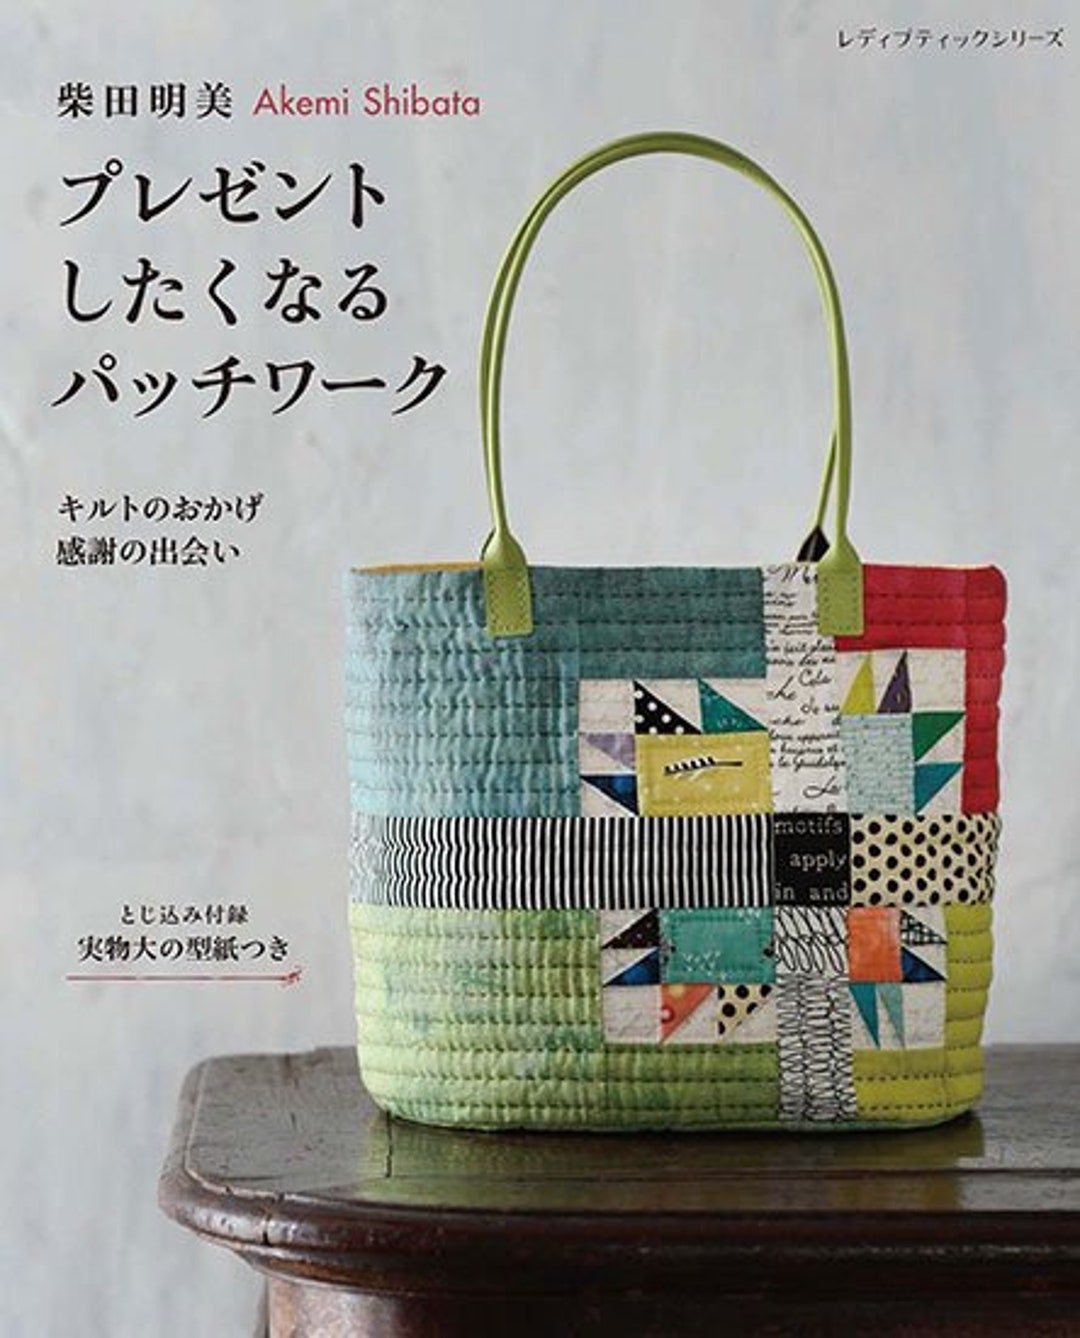 Etsy　Patchwork　Israel　Akemi　Items　for　Gifts　Shibata　Craft　Great　Japanese